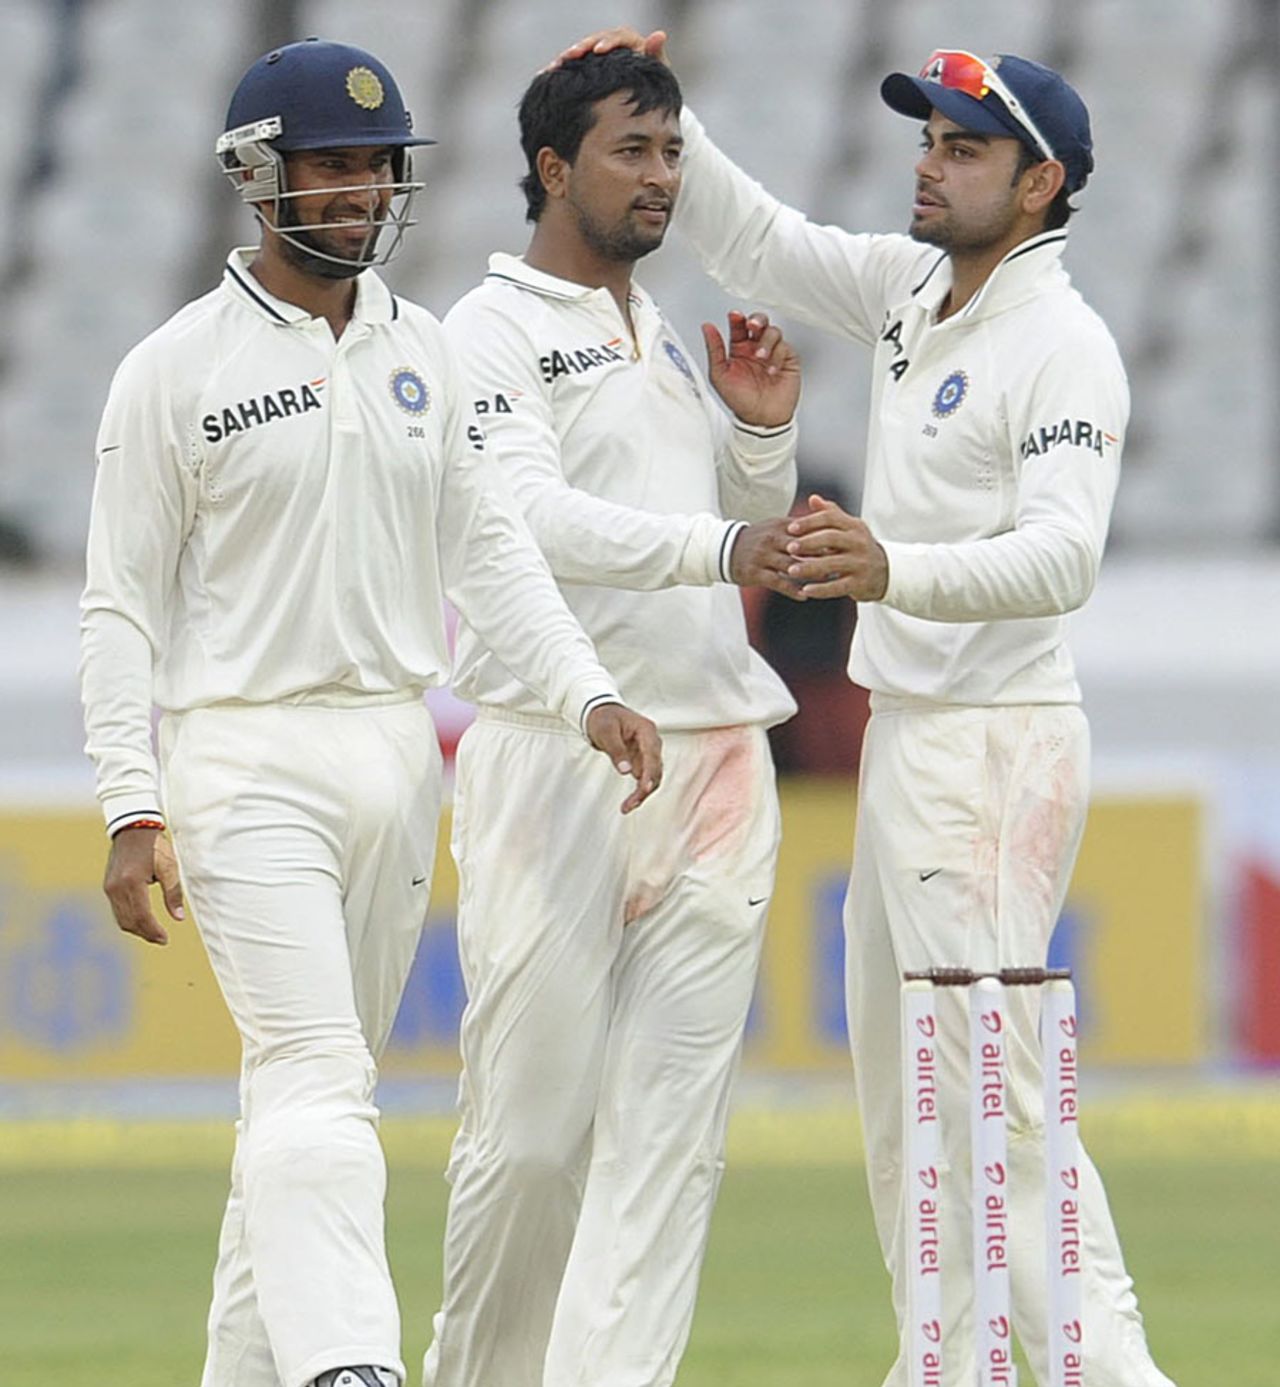 Pragyan Ojha with his team-mates after taking a wicket, India v New Zealand, 1st Test, Hyderabad, 2nd day, August 24, 2012